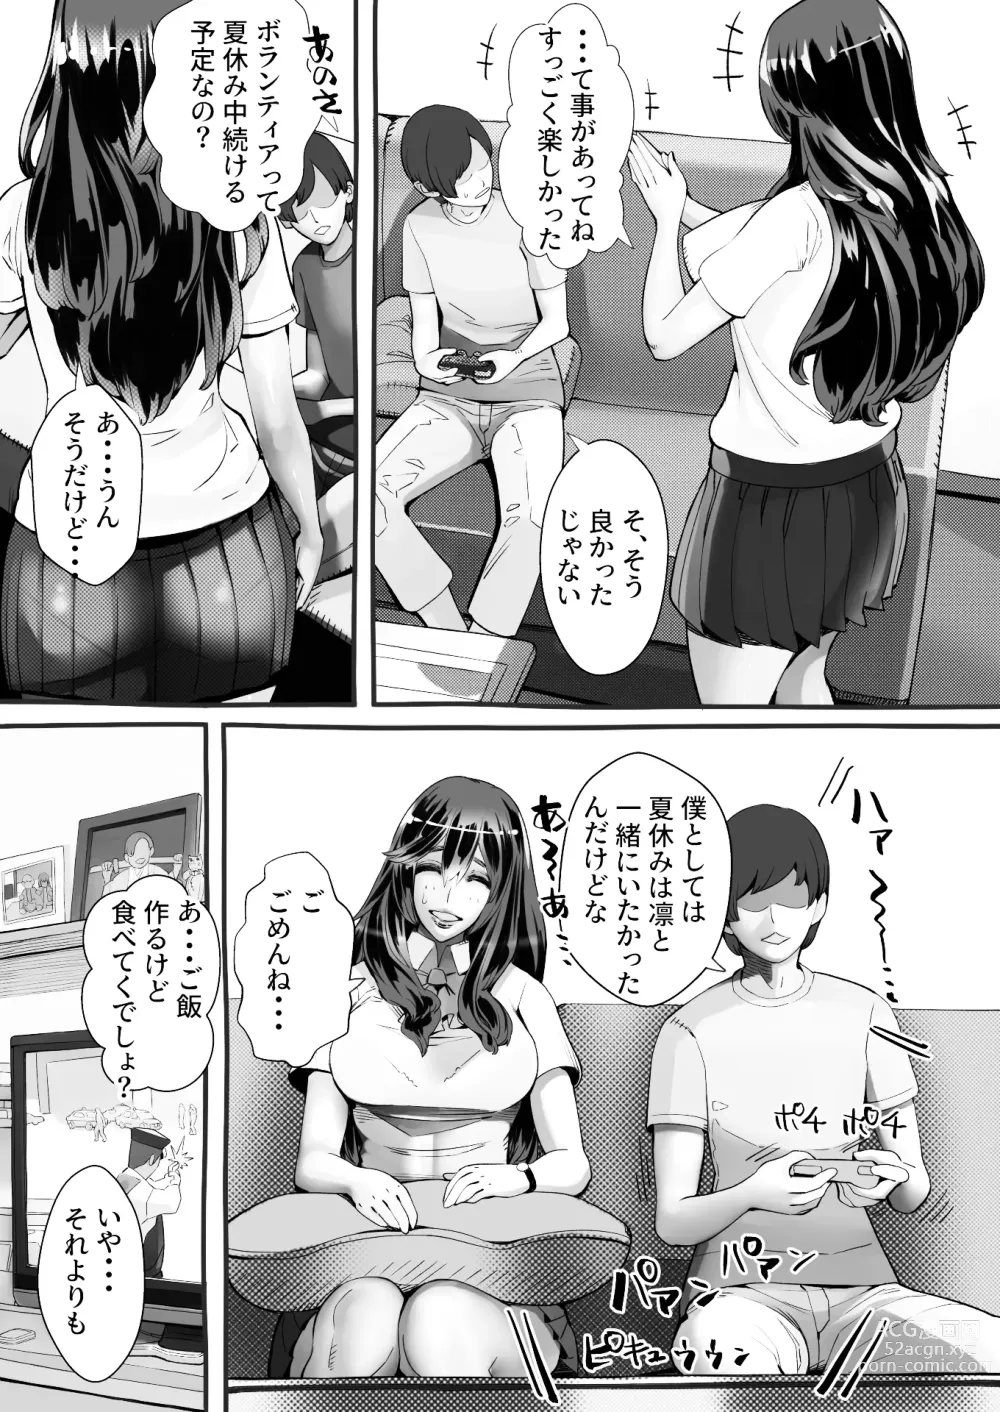 Page 22 of doujinshi 僕の彼女が他人棒で絶頂いたす